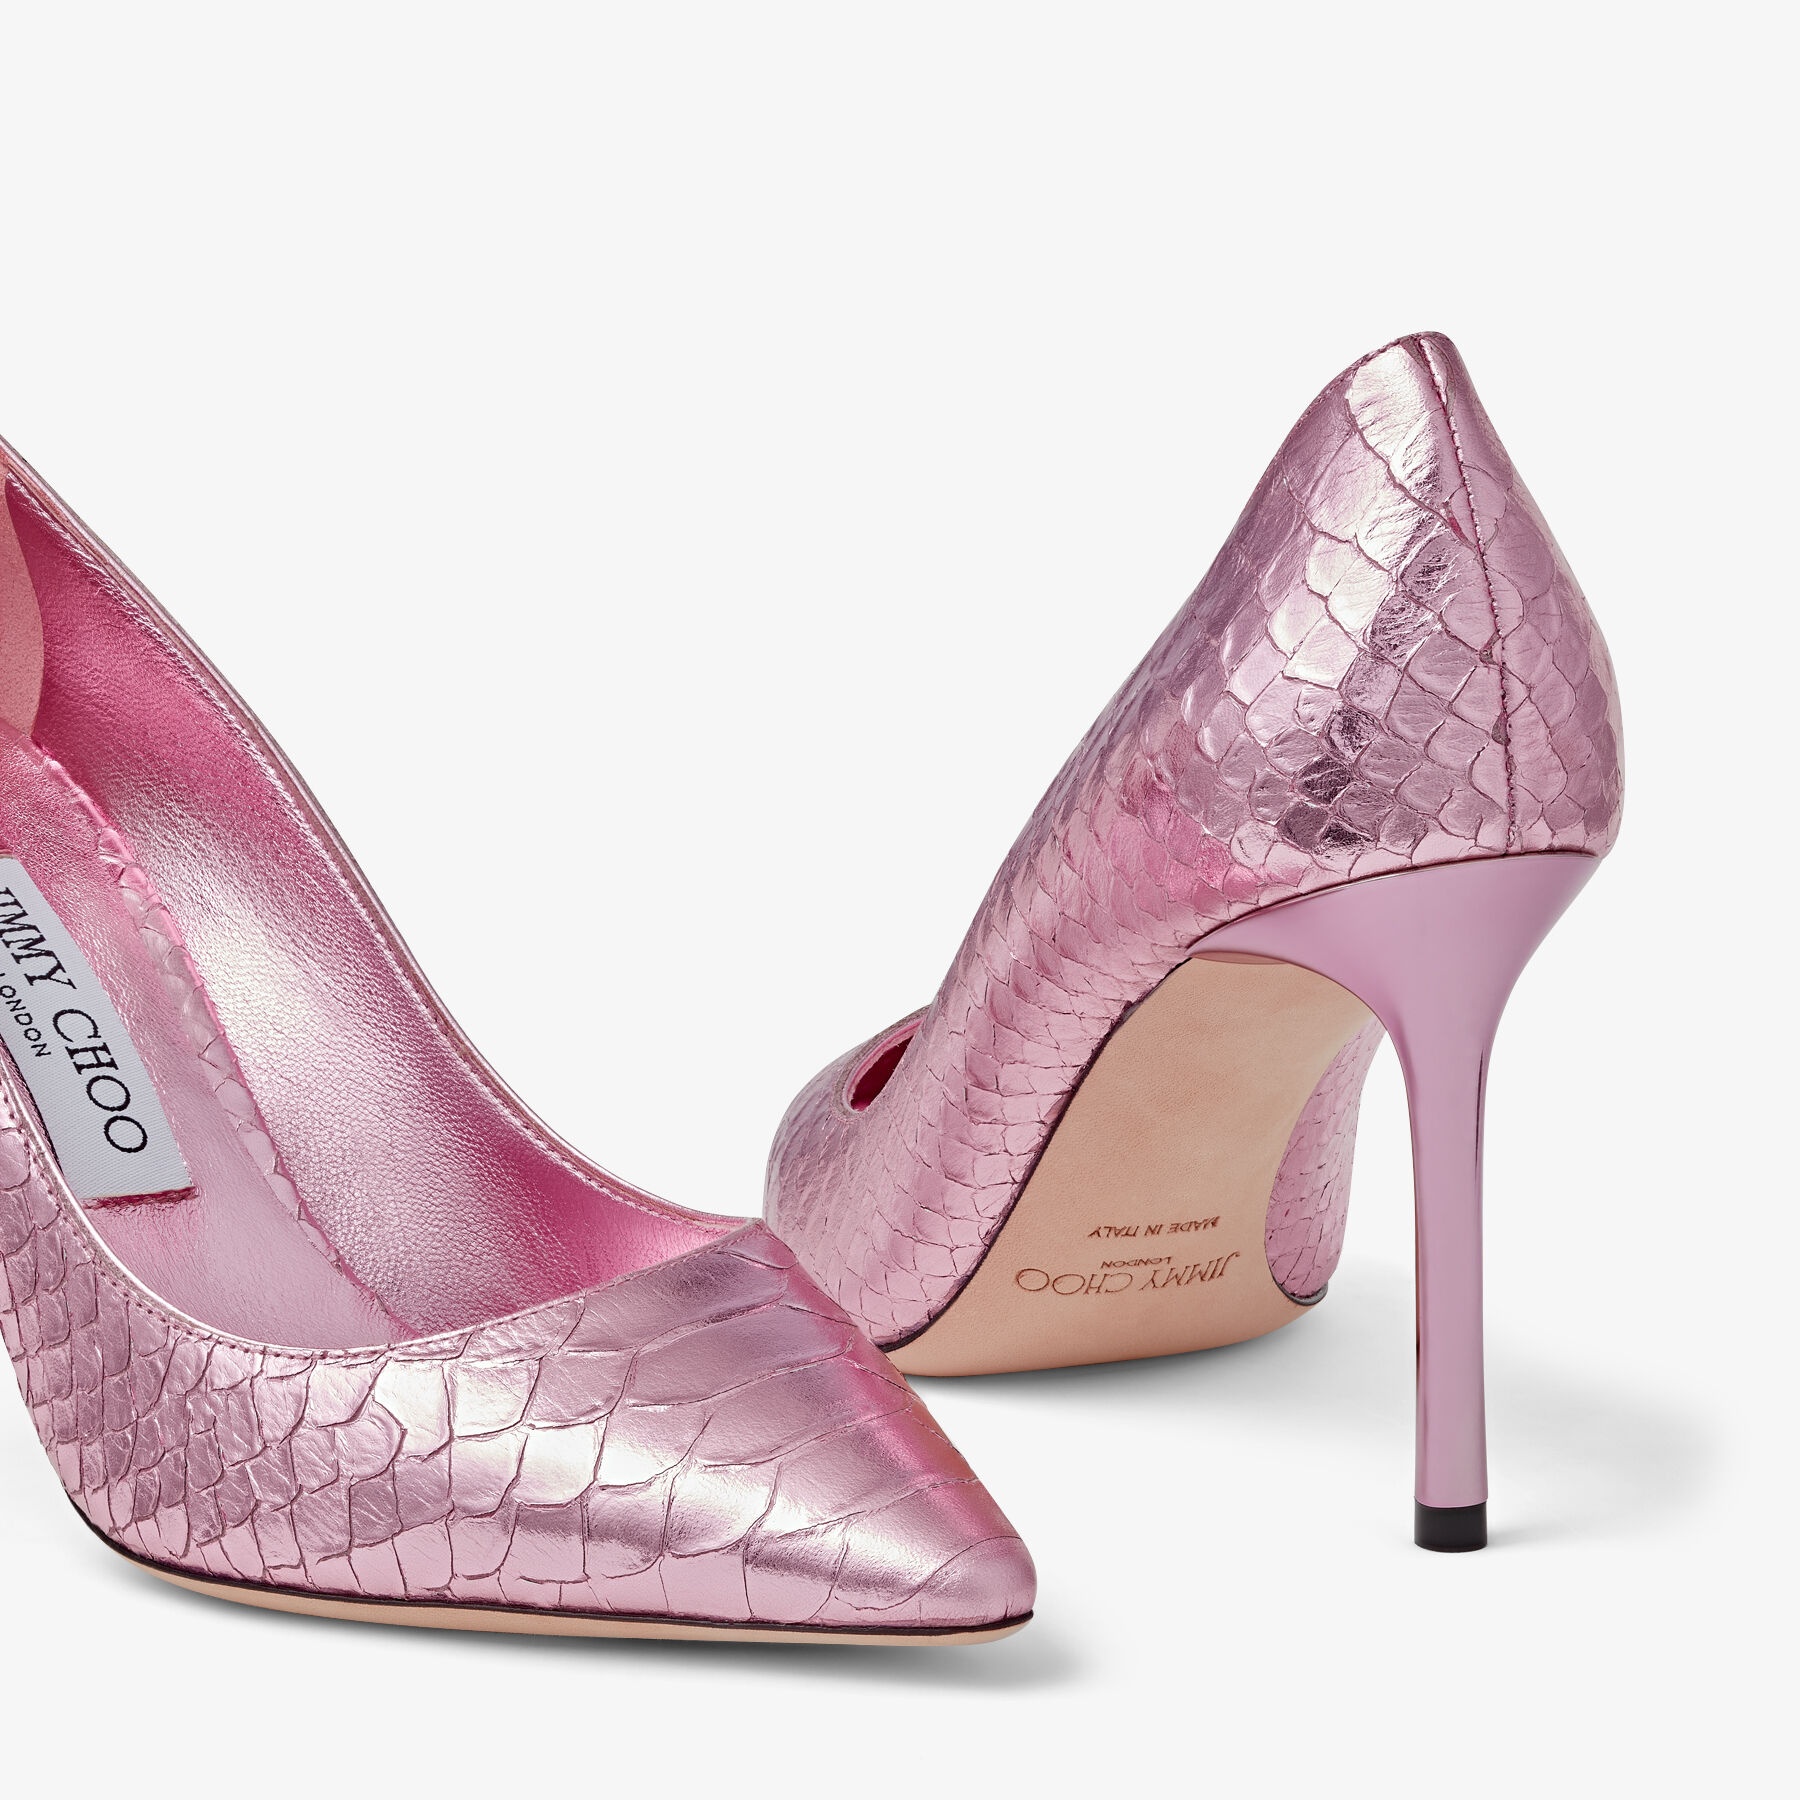 Romy 85
Candy Pink Metallic Snake Printed Leather Pumps - 3